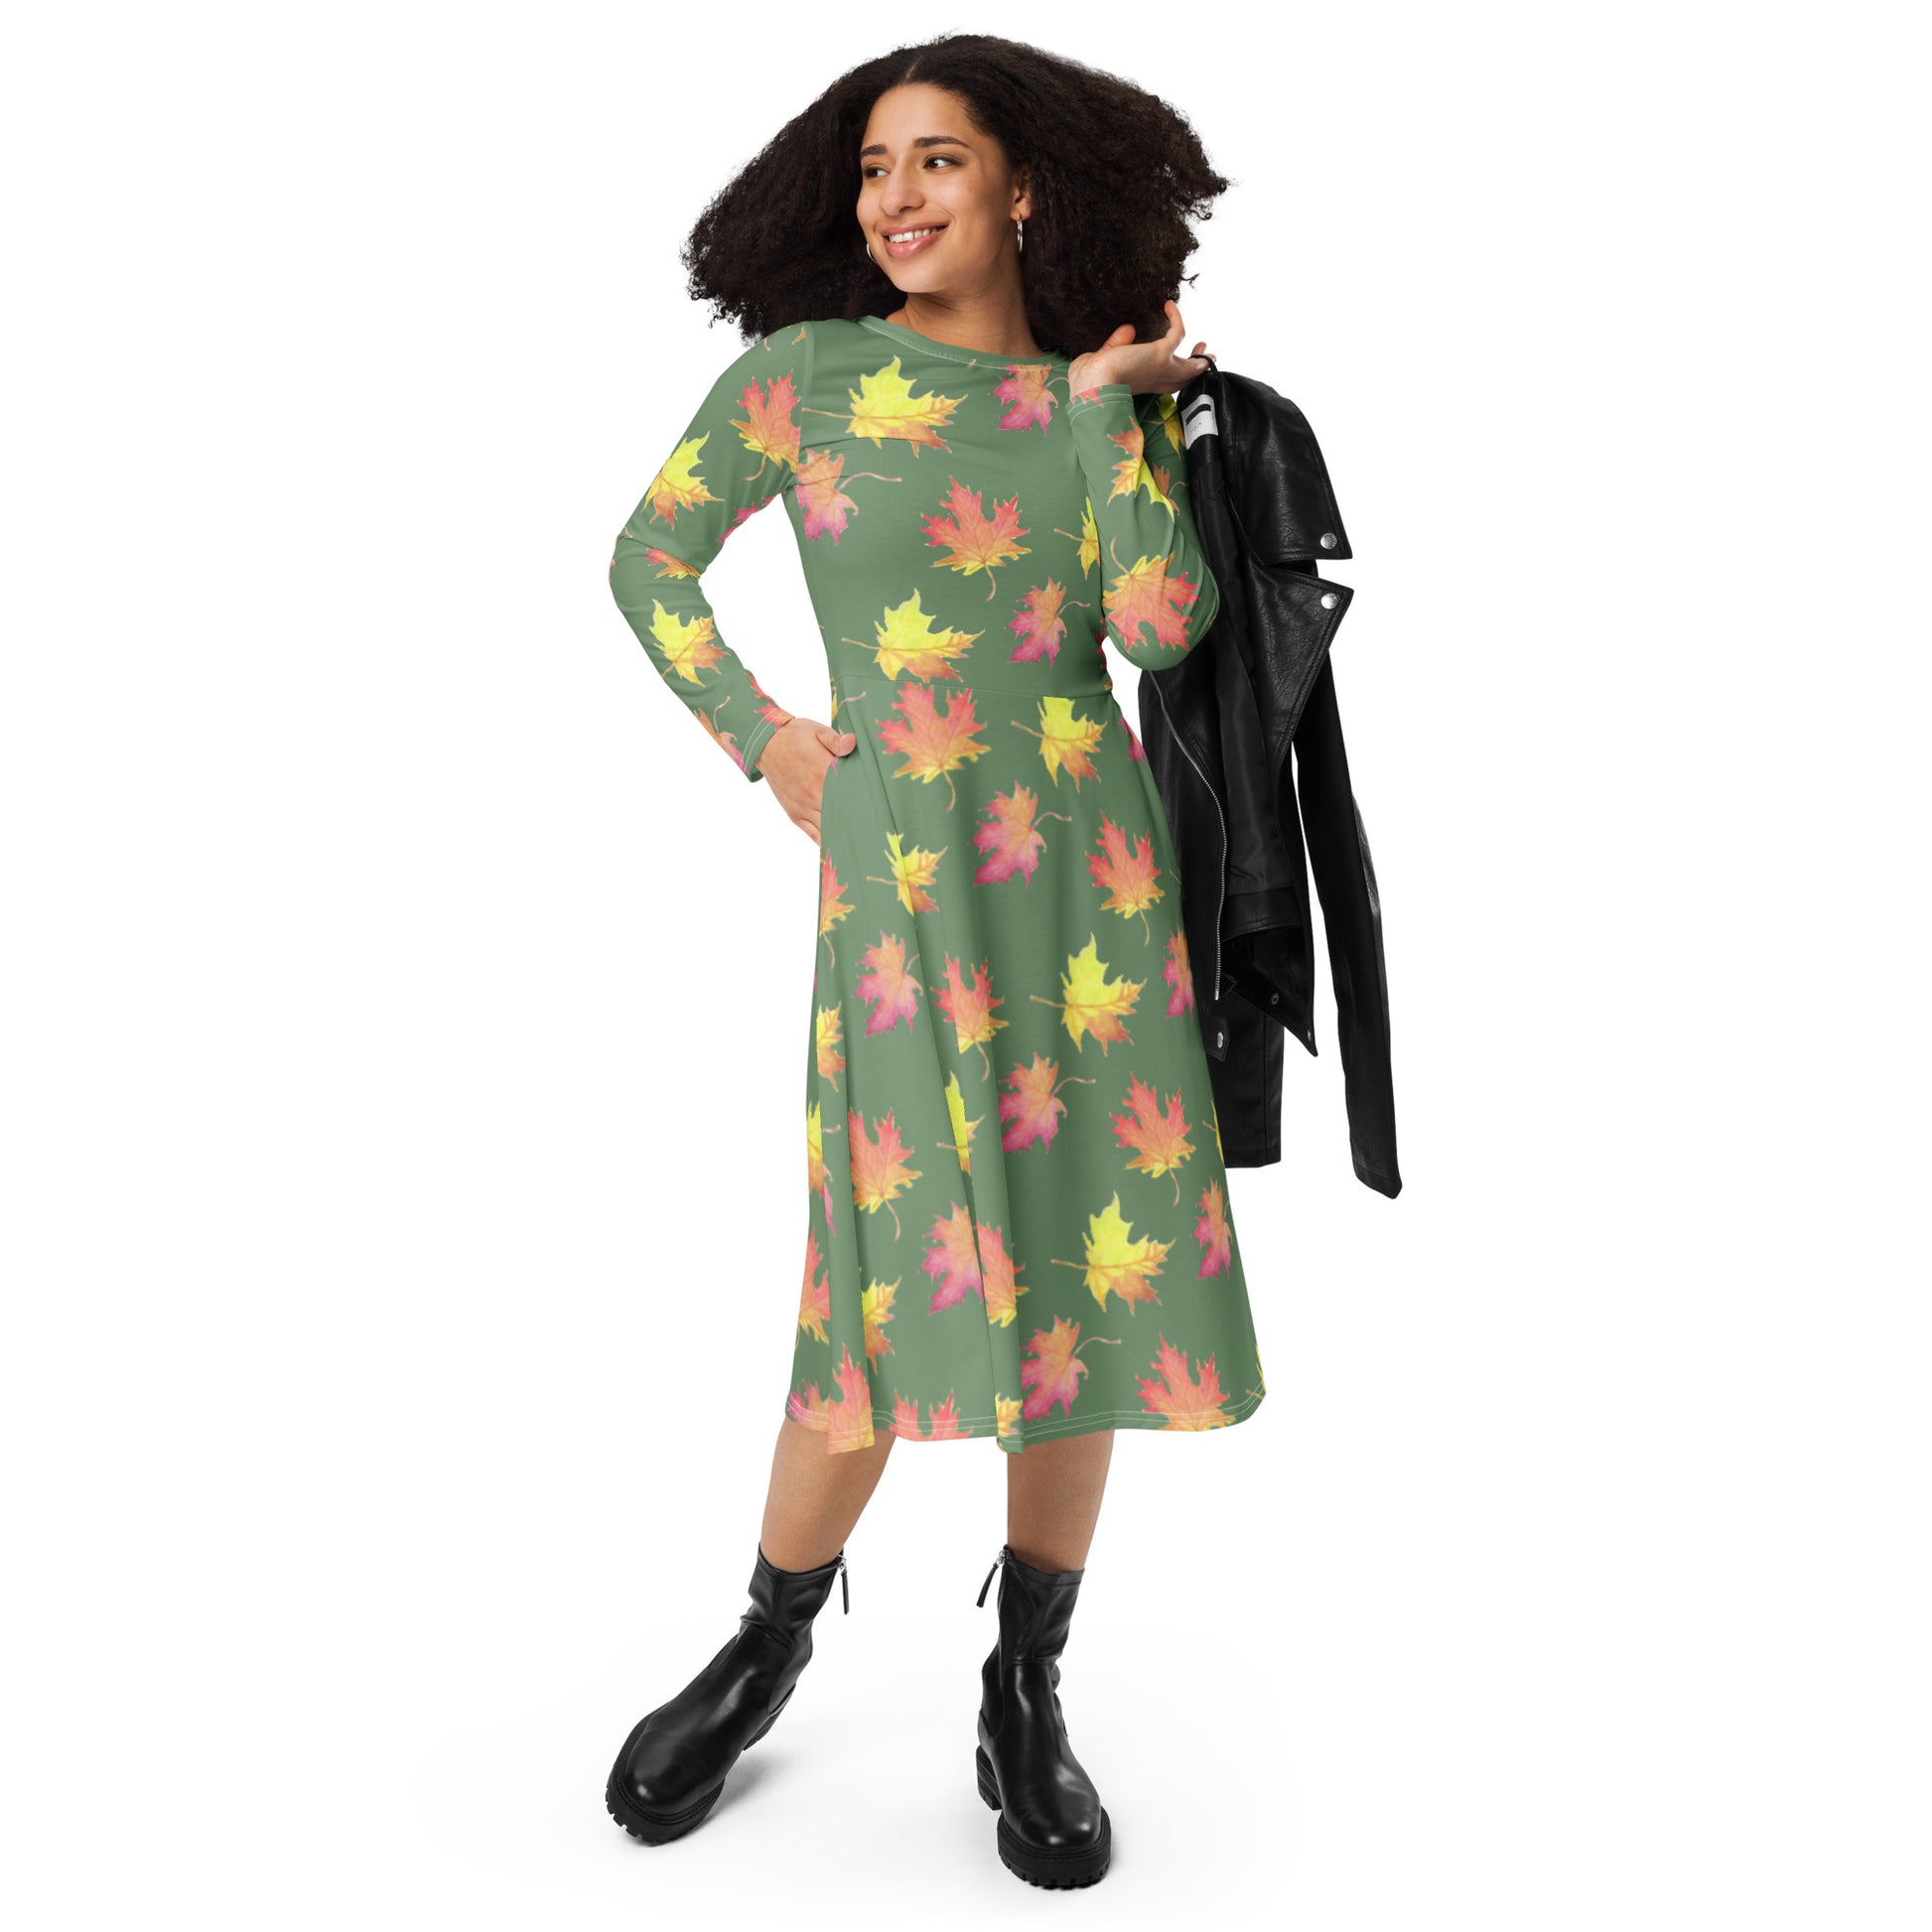 Long sleeve midi dress. Watercolor fall leaves patterned over an amulet green background. Soft and flattering fit. Boatline neck, fitted waist, flared bottom, and side pockets. Photo shows dress on female model holding jacket over shoulder.